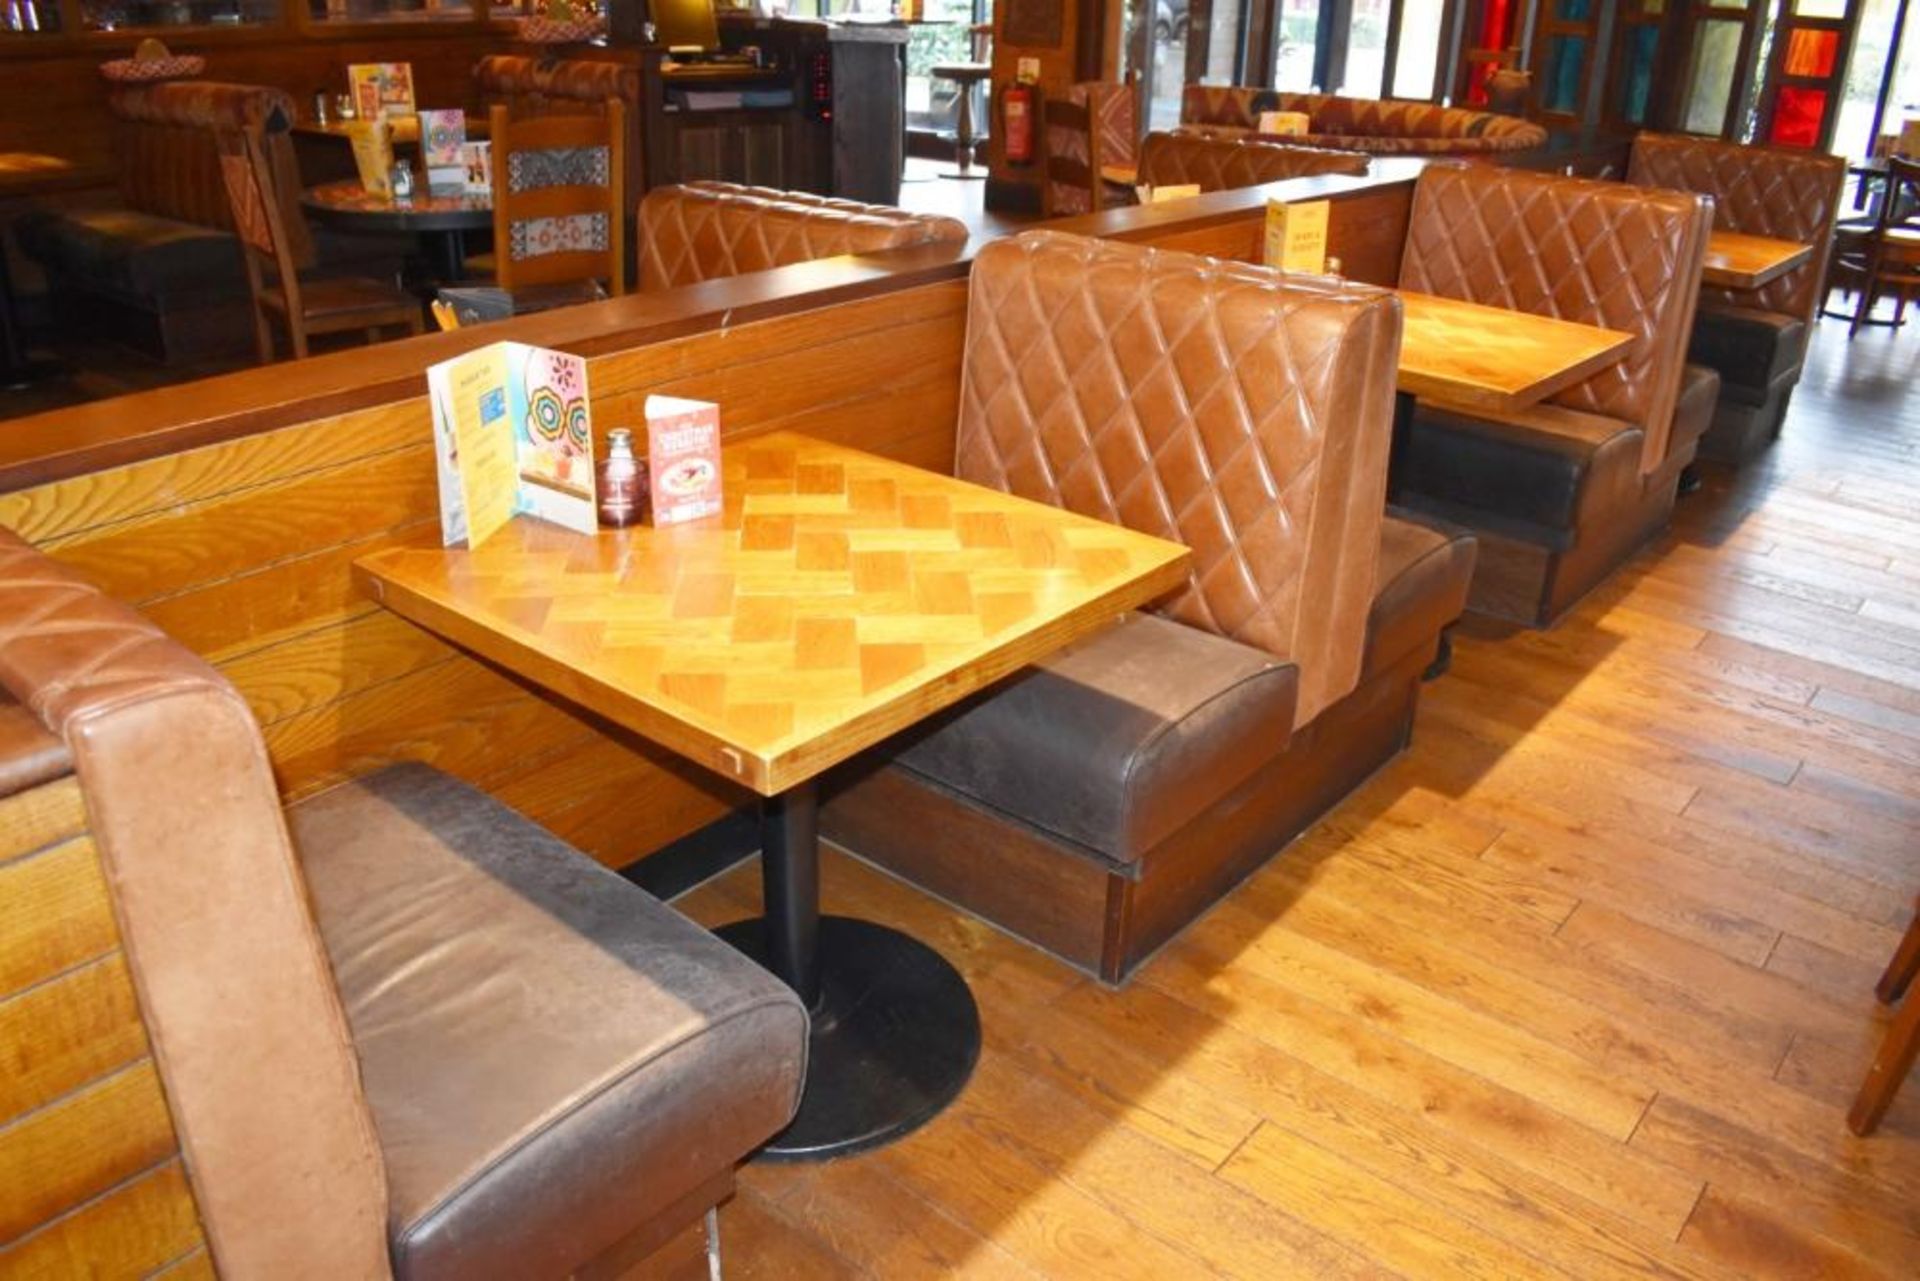 5 x Parquet Design Restaurant Dining Tables With Cast Iron Bases - Small Size - CL461 - Location: Lo - Image 4 of 6